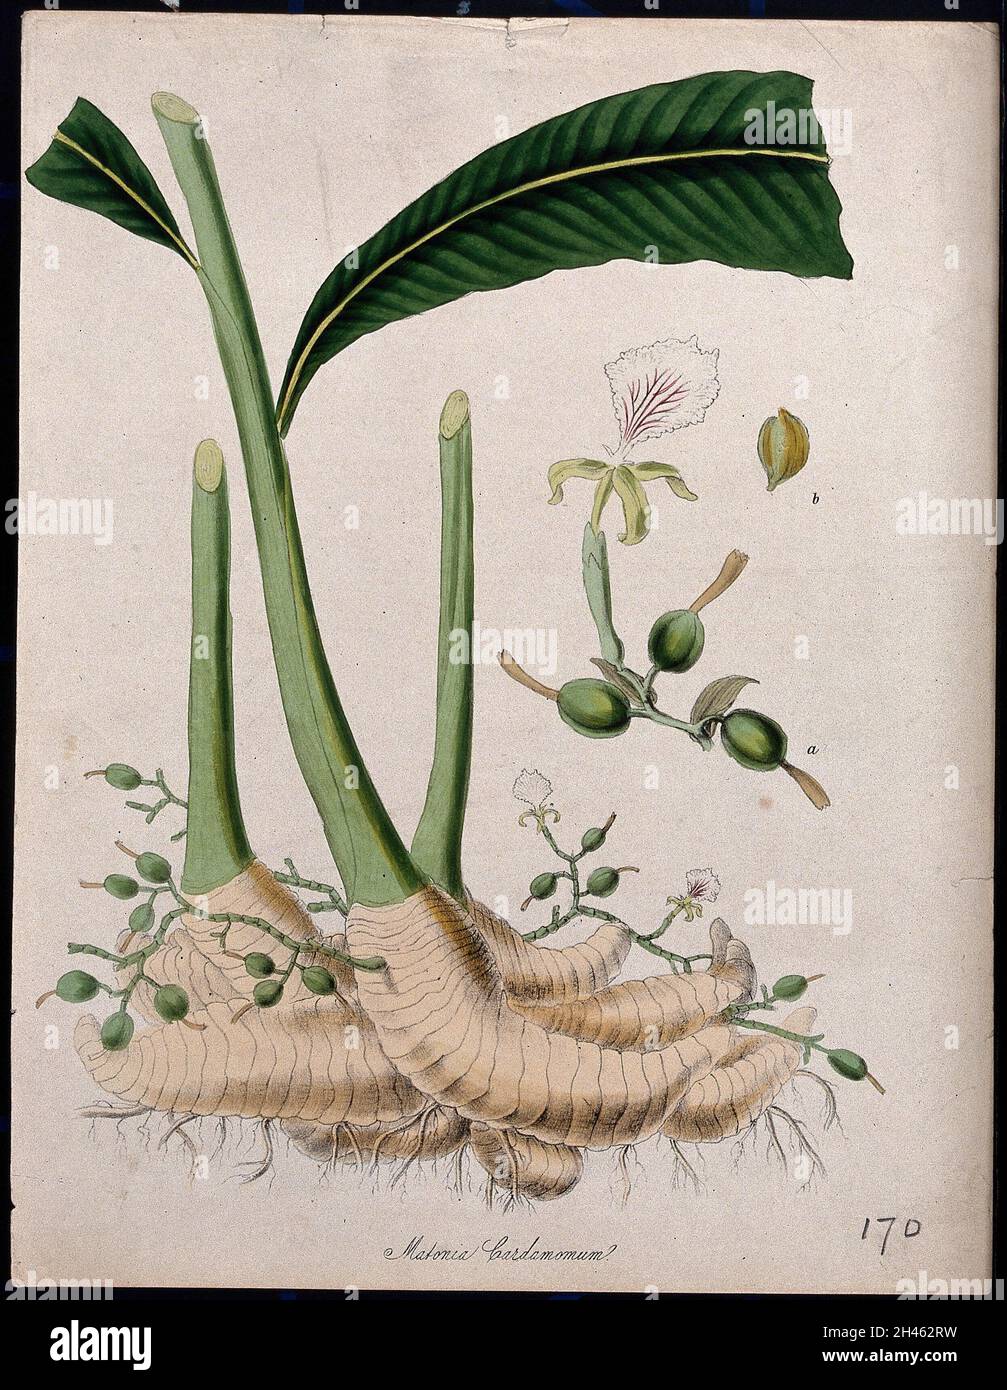 Cardamom plant (Elettaria cardamomum): rootstock sprouting leafy and flowering stems, and separate flower. Coloured lithograph after M. A. Burnett, c. 1847. Stock Photo